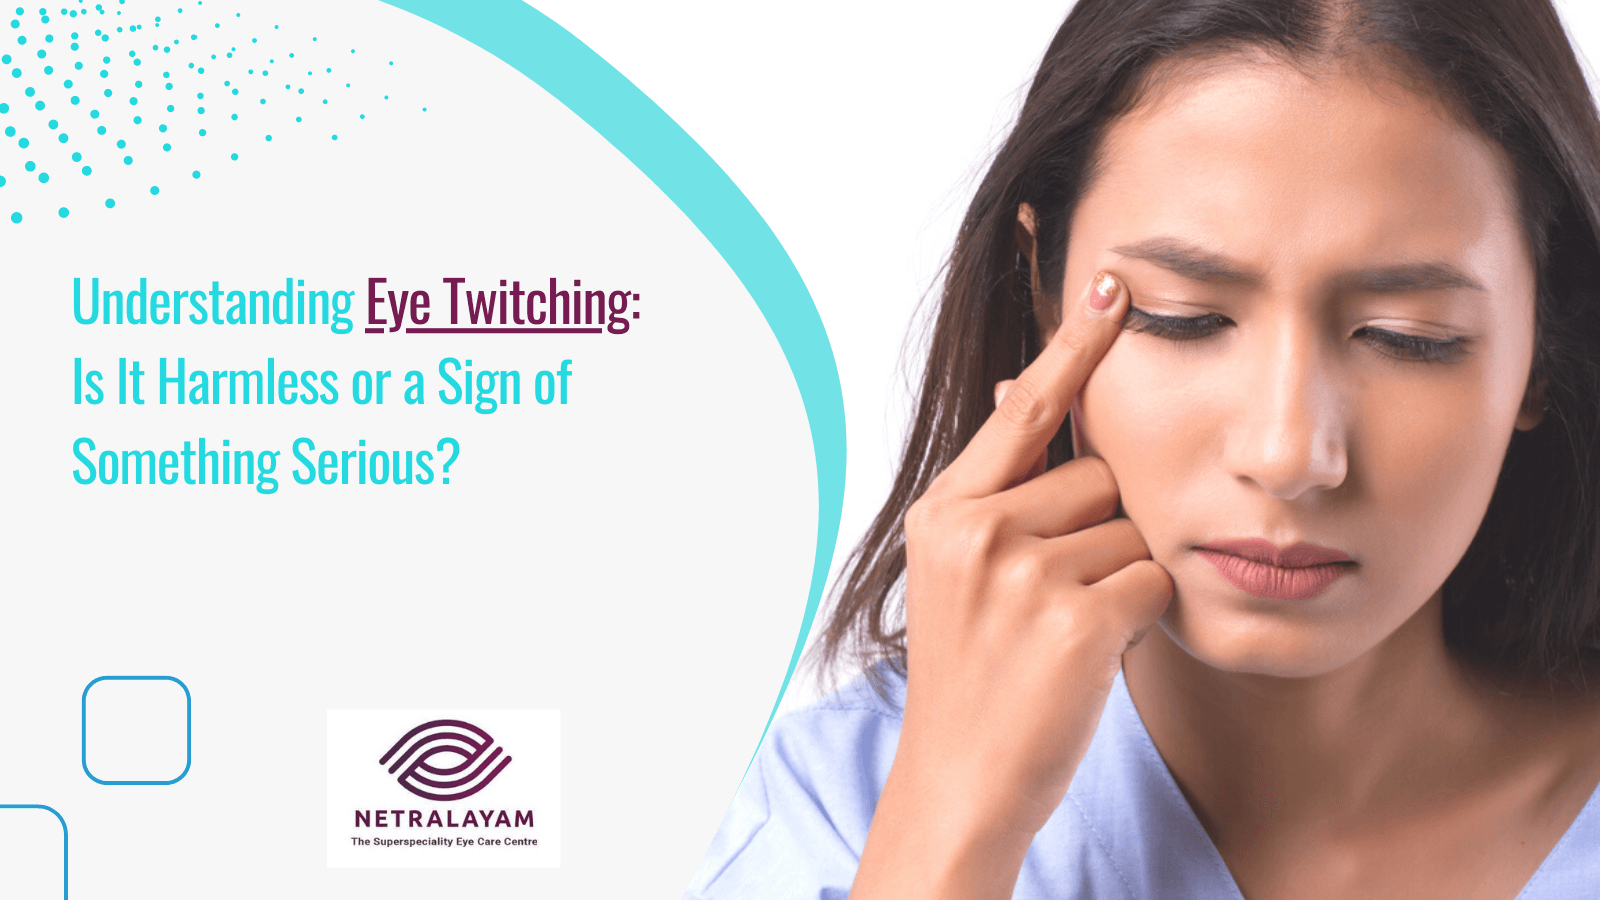 Understanding Eye Twitching: Is it Harmless or a Sign of Something Serious?